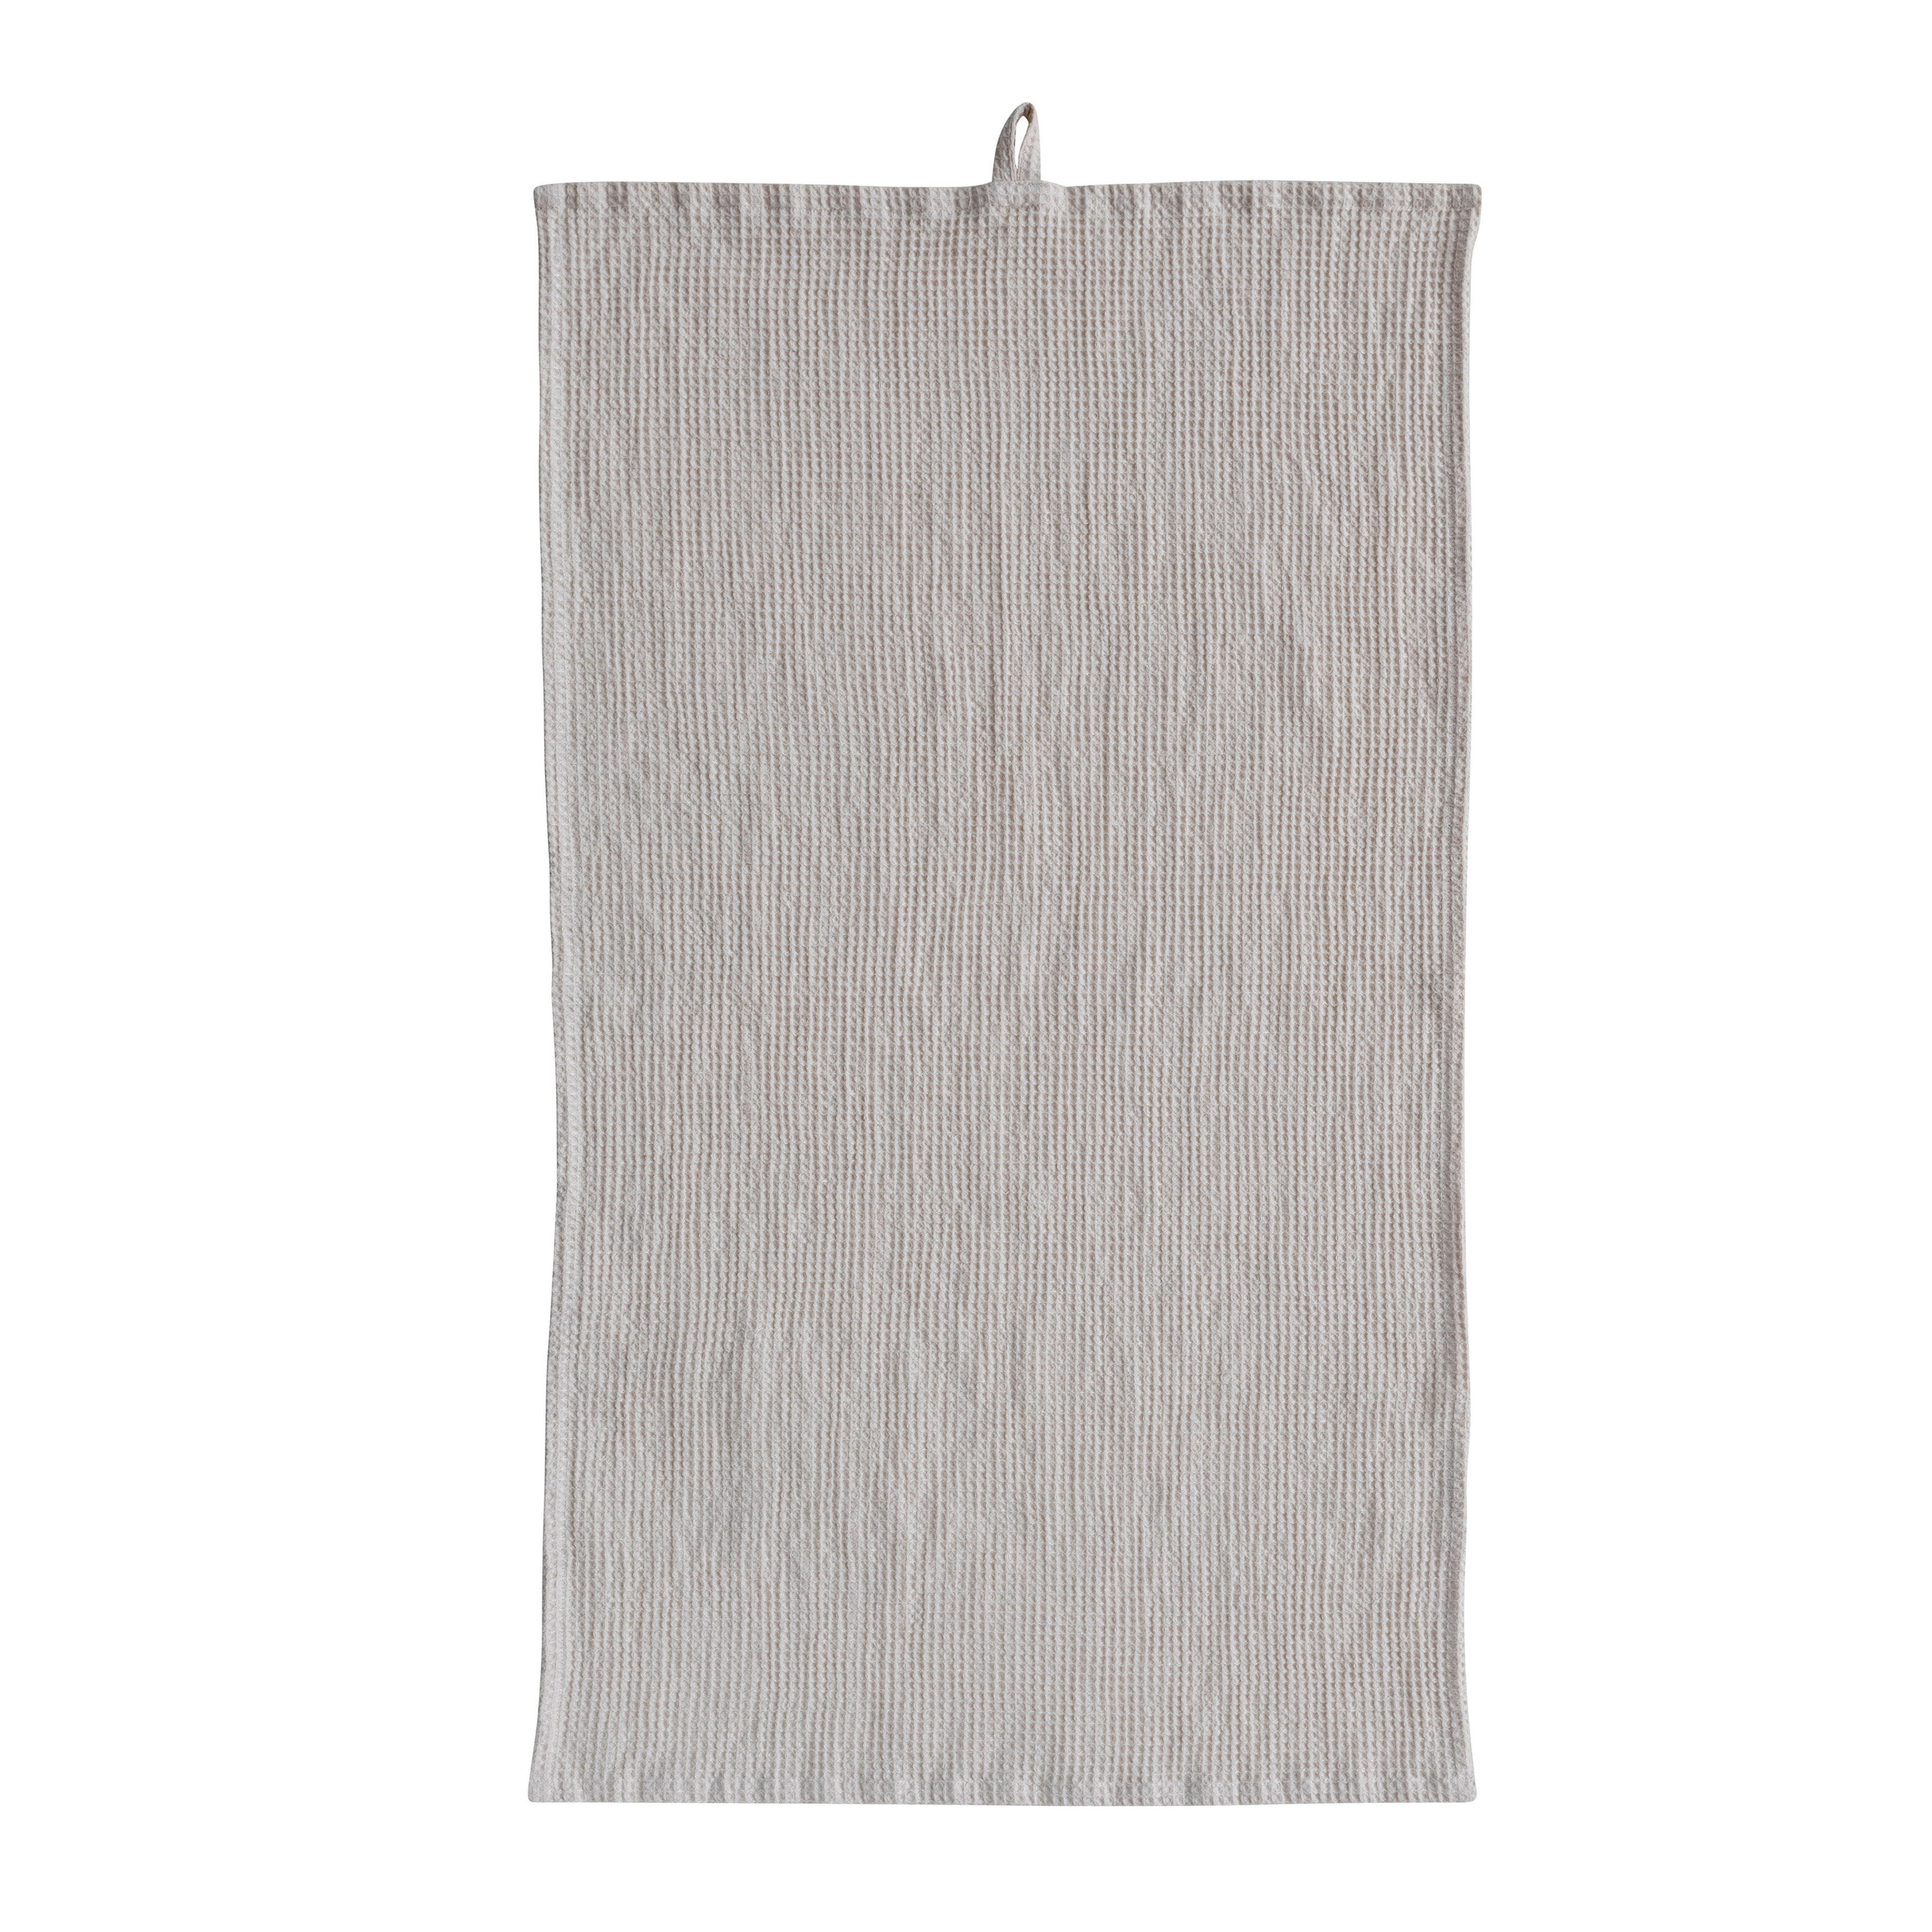 Oversized Woven Linen and Cotton Waffle Decorative Tea Towel with Loop for Dining and Kitchen, Cream Color - Image 0